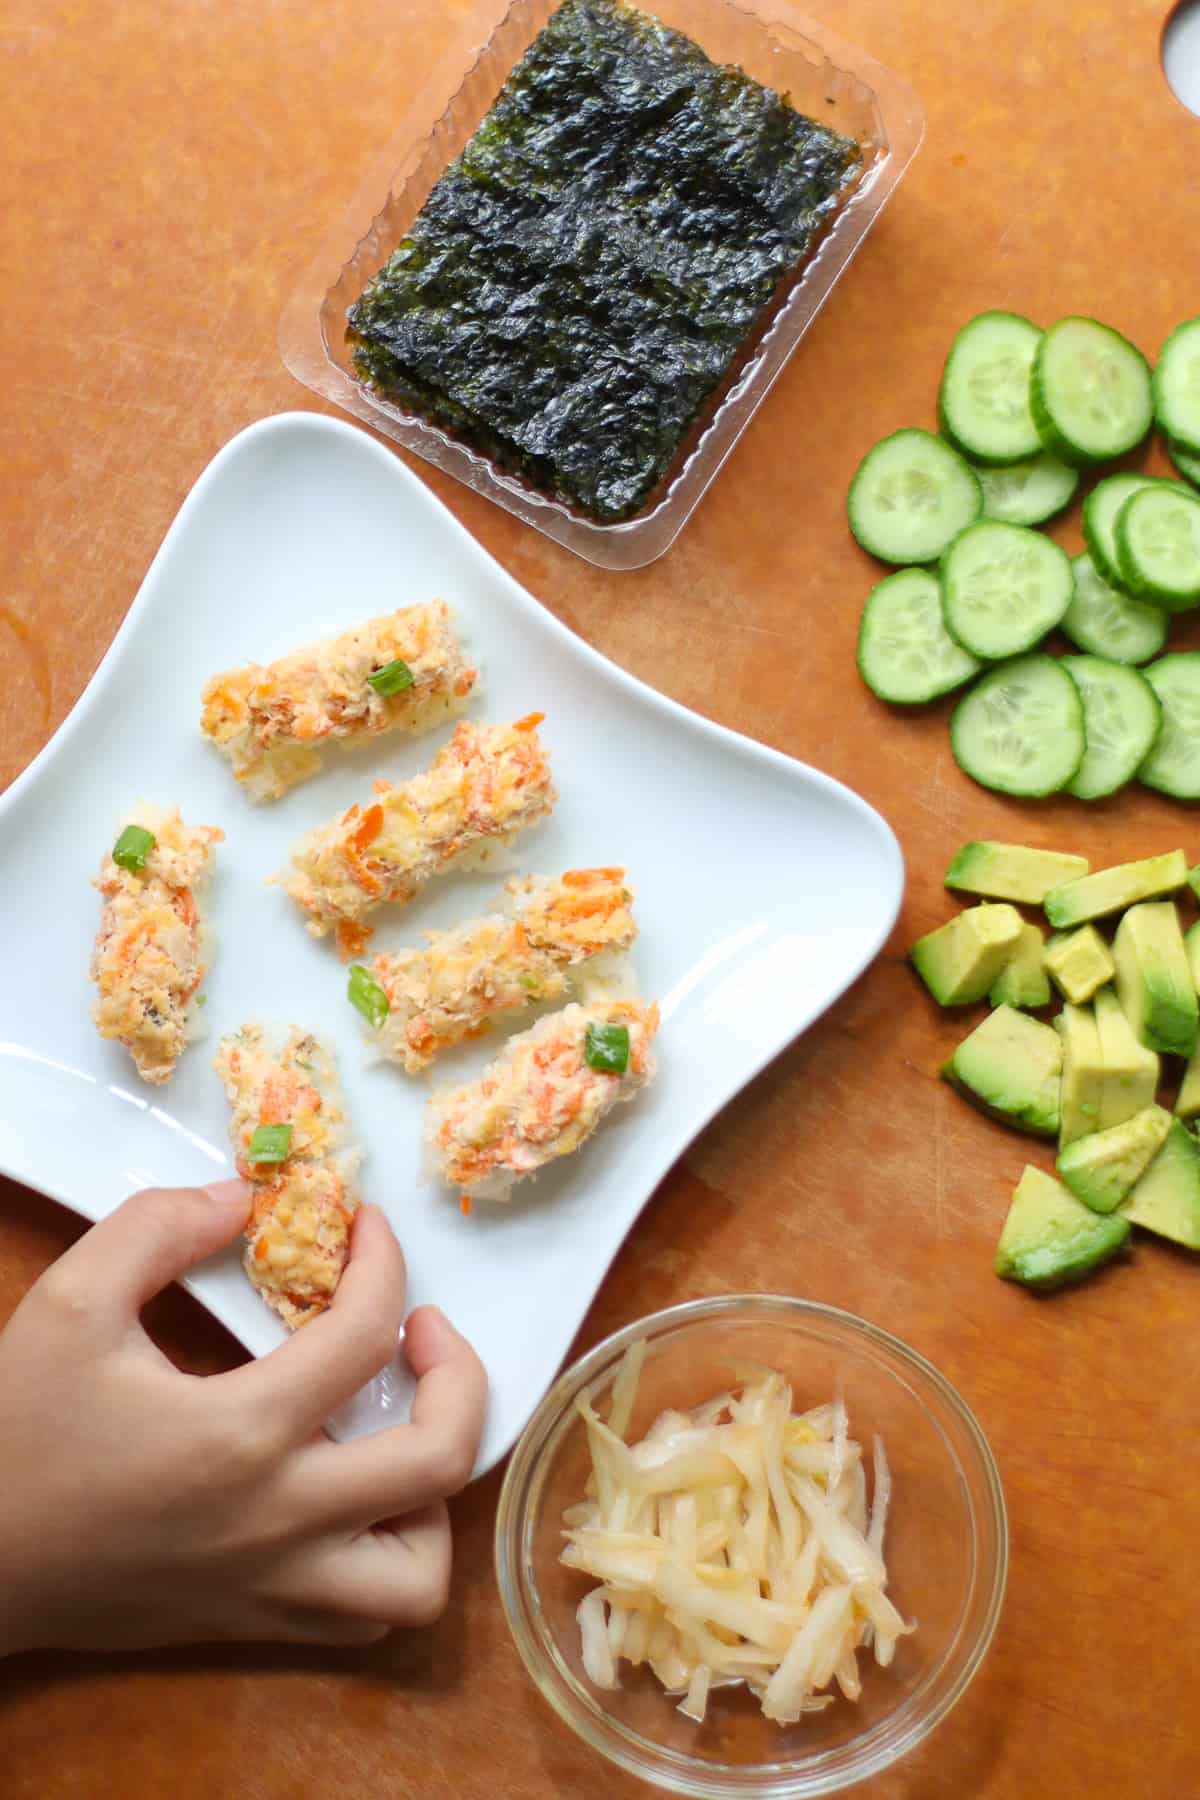 Sushi bake sliced into finger shapes with seaweed sheet, kimchi, cucumber, and avocado on the side.